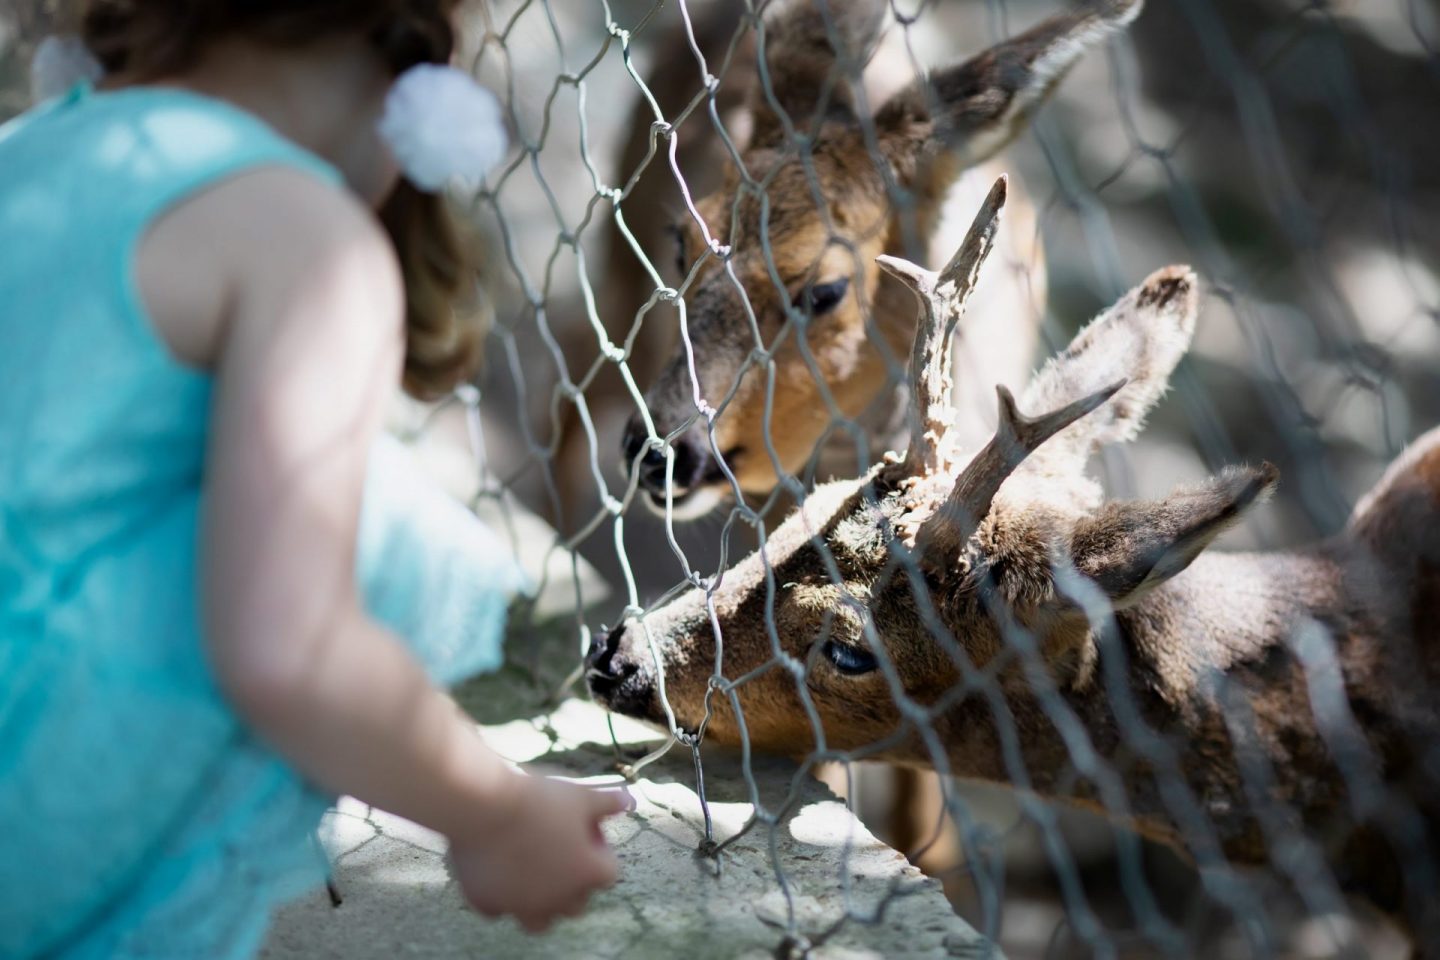 Little girl feeding deer through the fence at the petting zoo